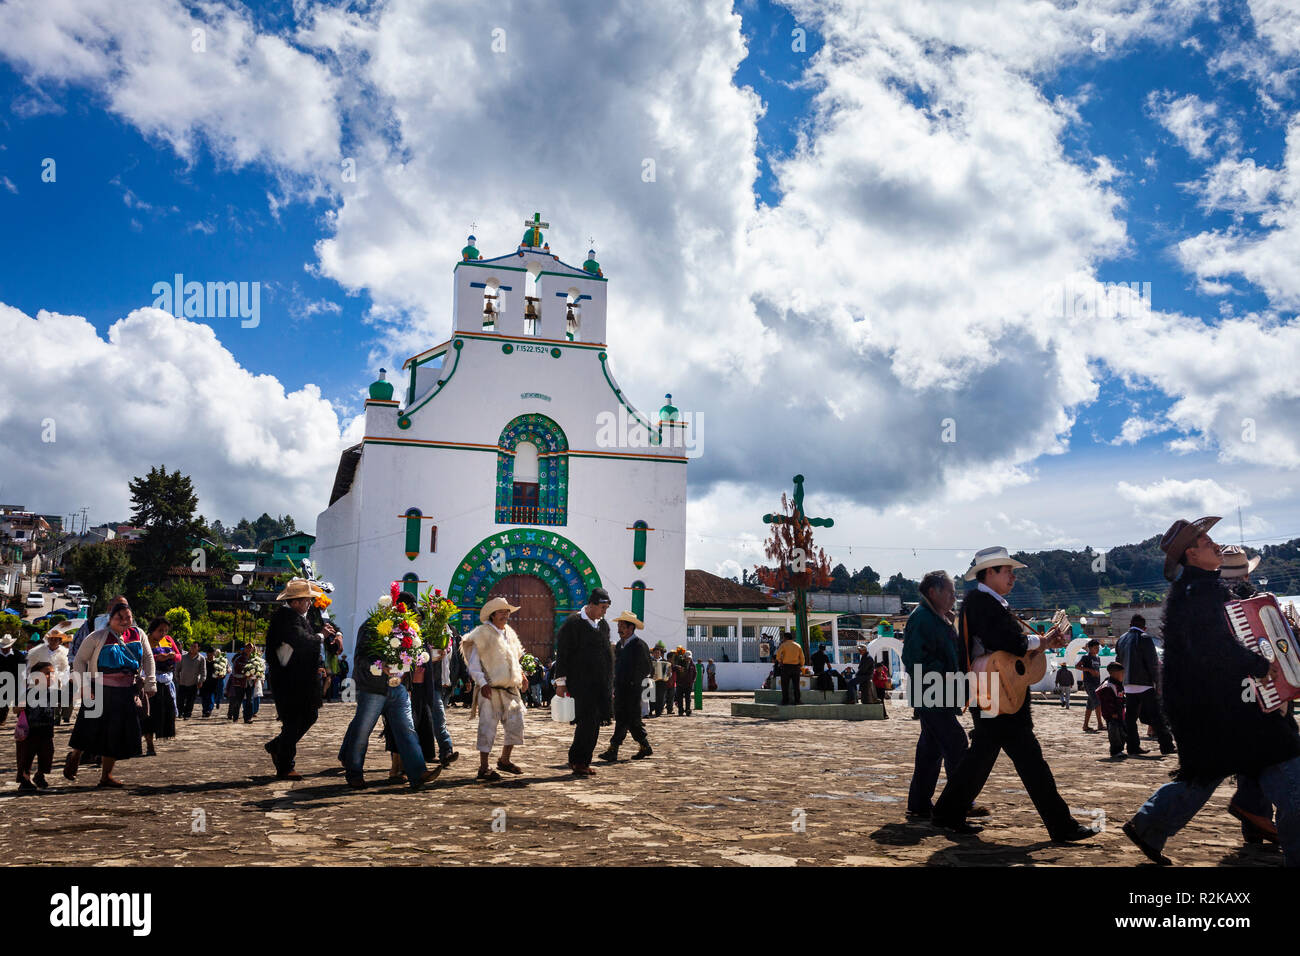 A funeral procesion crosses the plaza of Chamula, Chiapas, Mexico. Stock Photo